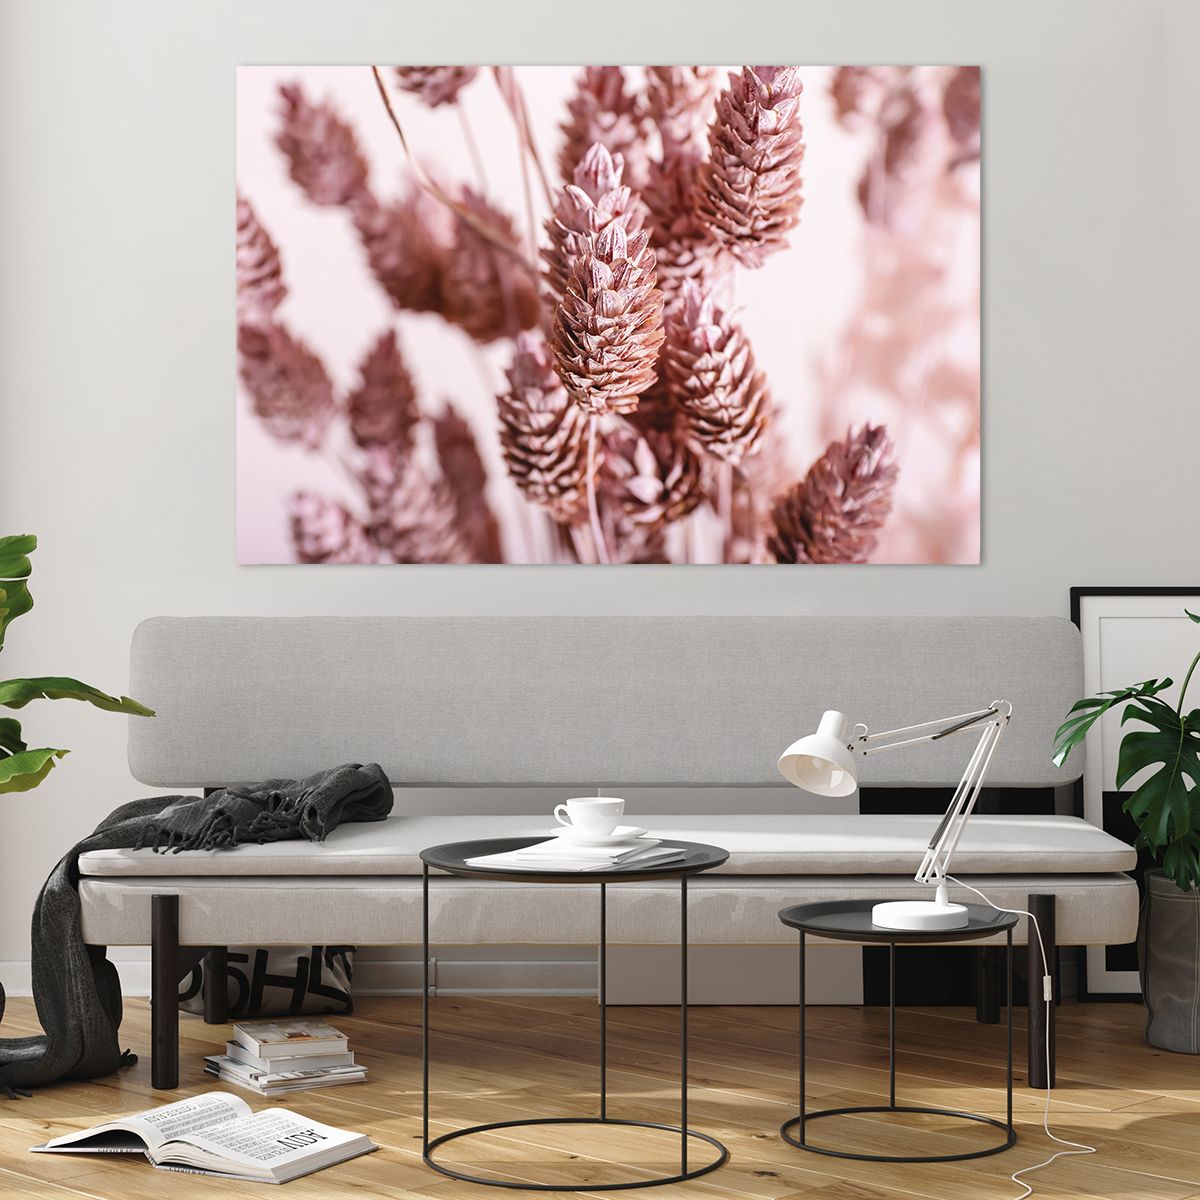 Glass picture  Dried Flower, Glass picture  Flower, Glass picture  Meadow, Glass picture  Nature, Glass picture  Pastel Colors